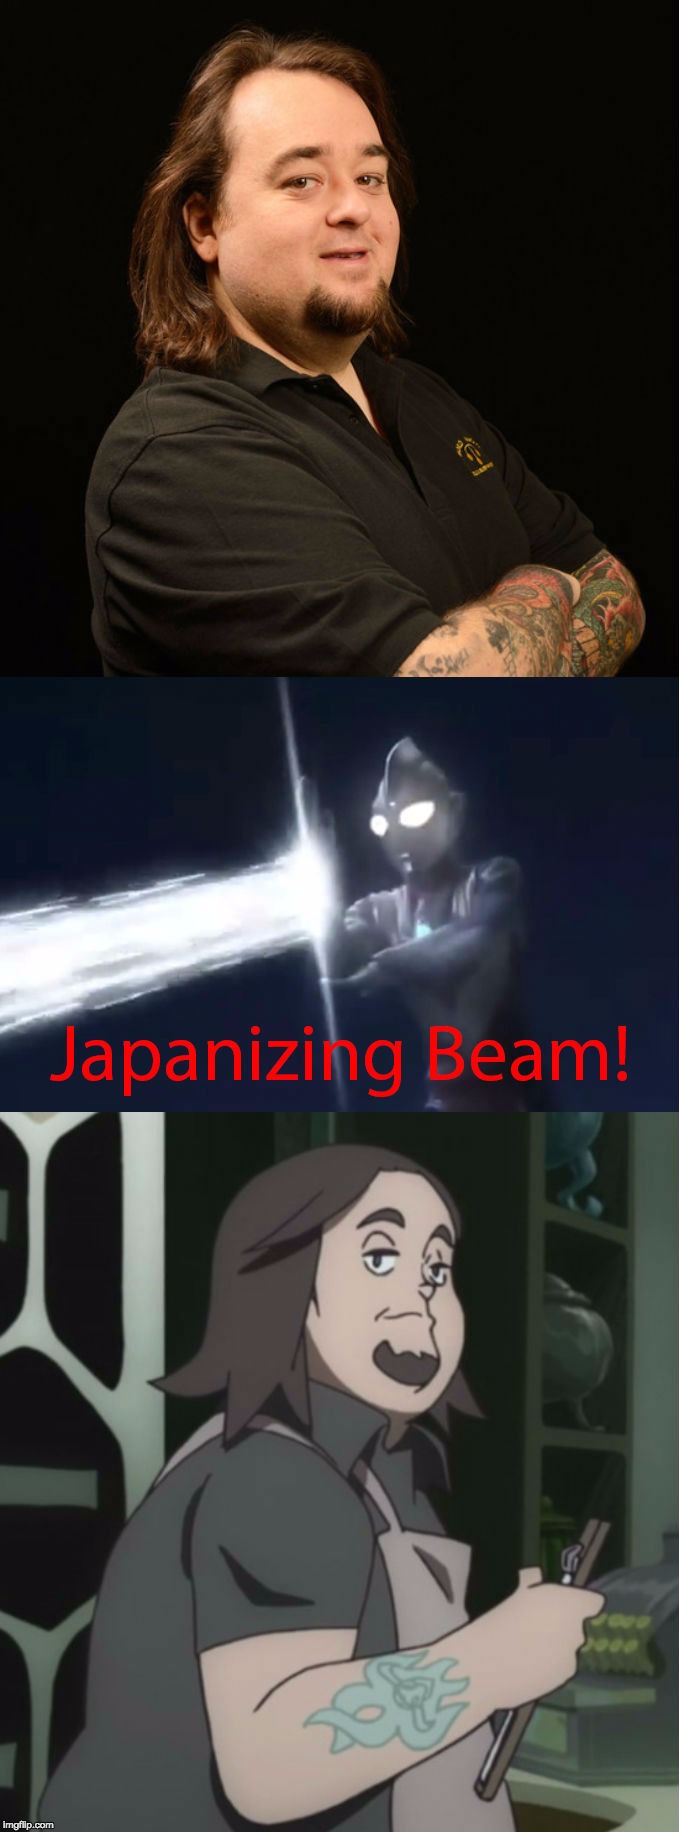 Austin "Chumlee" Russell | image tagged in memes,japanizing beam,chumlee,pawn stars,little witch academia,anime | made w/ Imgflip meme maker